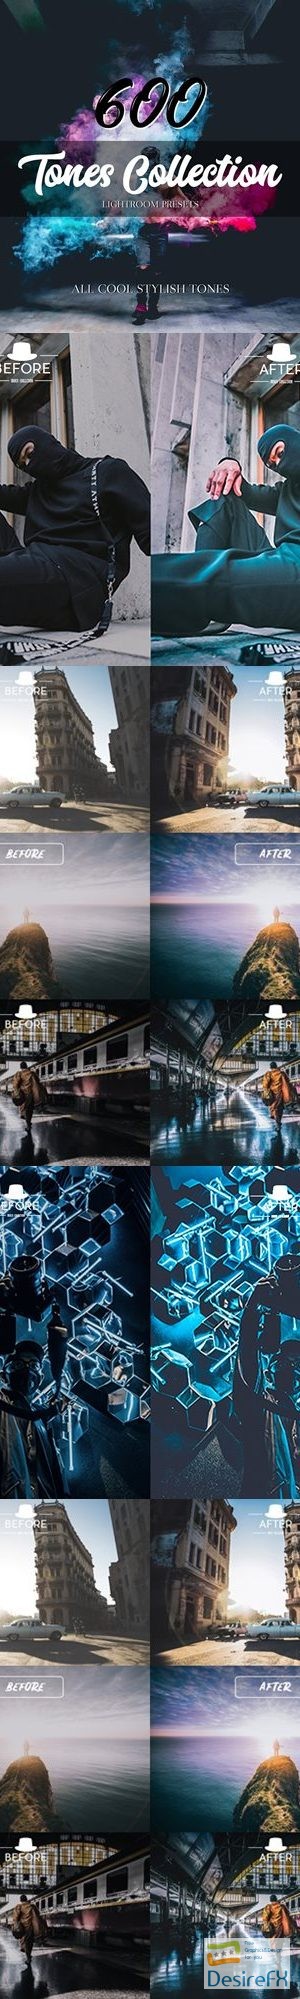 +600 Tones Collection - Presets 2109970